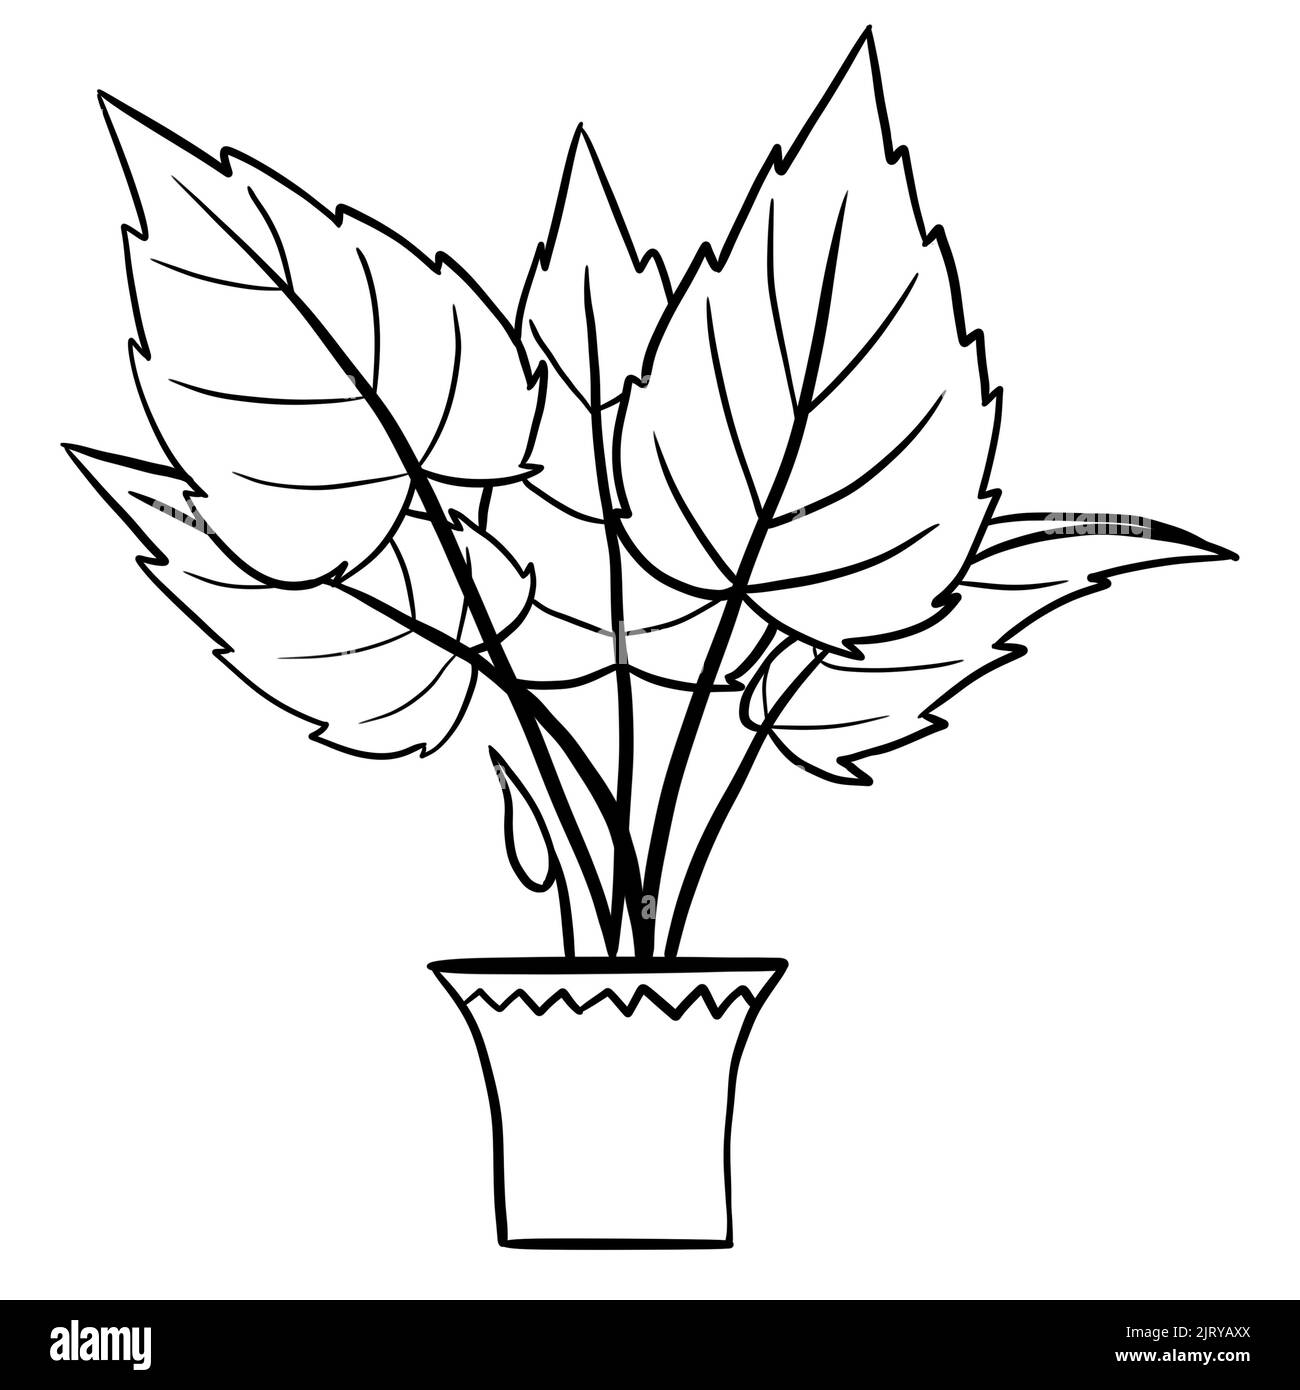 Alocasia begonia in a pot in black line outline cartoon style. Coloring book houseplants flowers plant for interrior design in simple minimalist design, plant lady gift Stock Photo